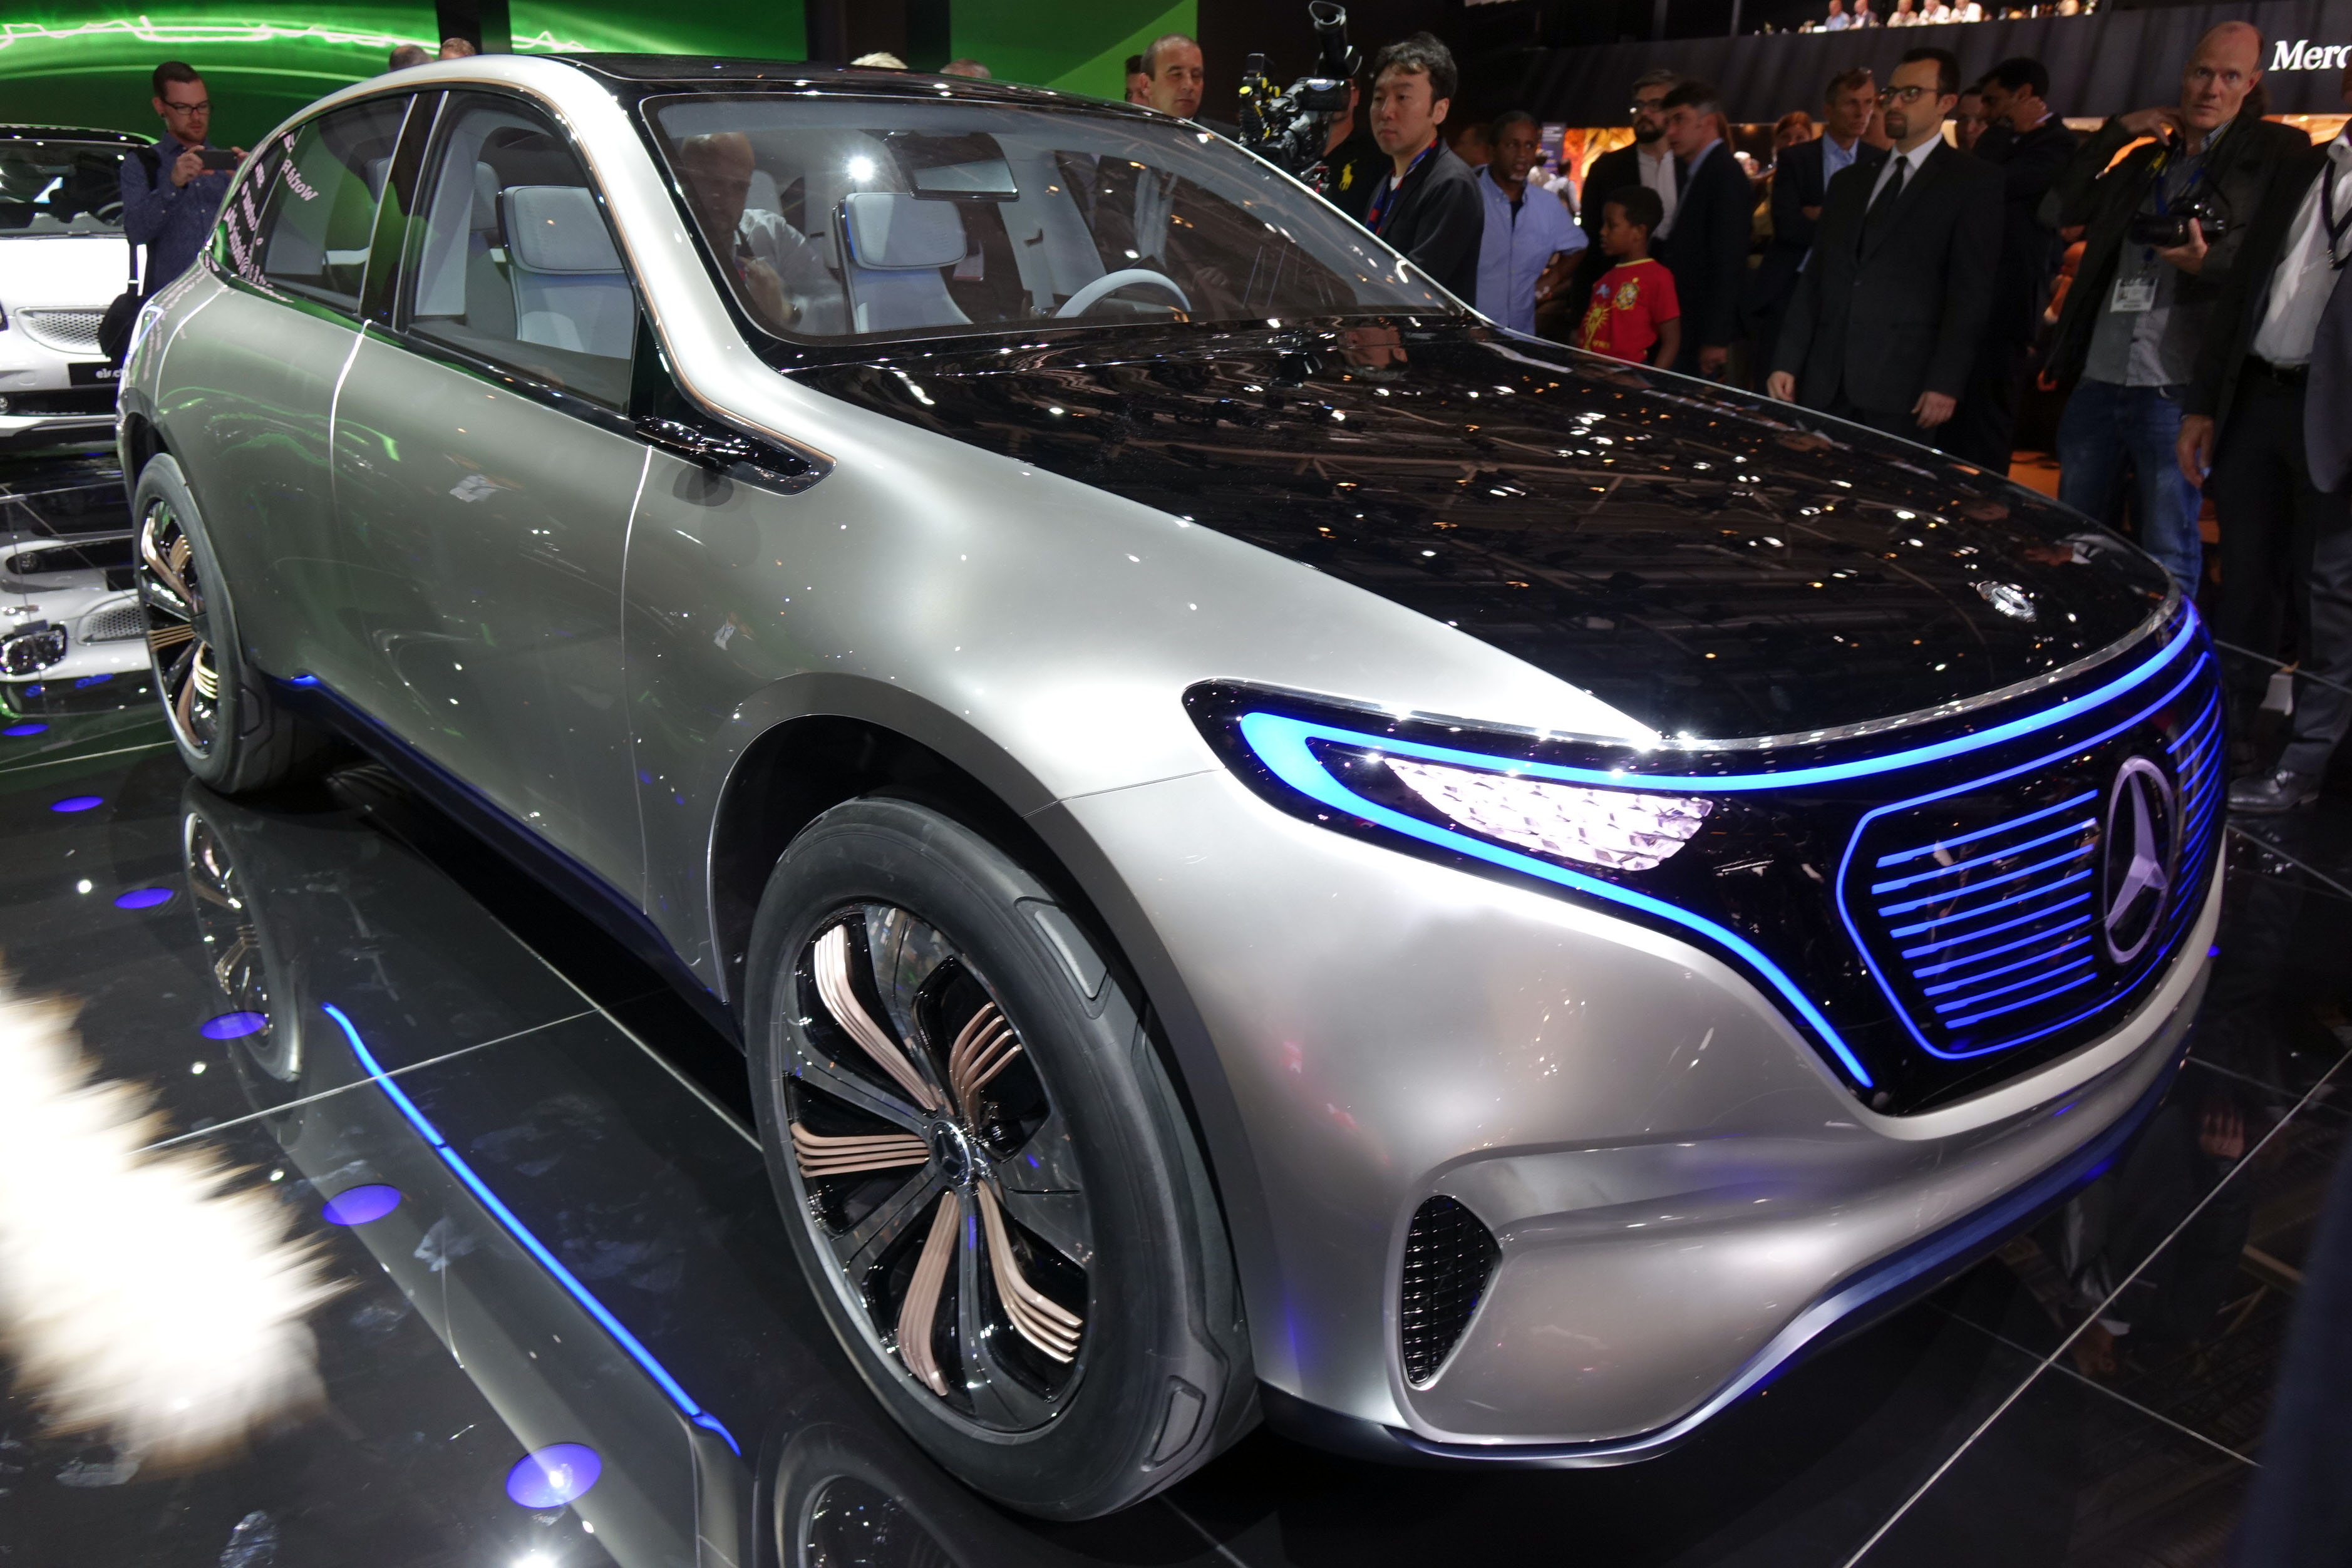 Mercedes previews first of ‘EQ’ electric cars with SUV concept